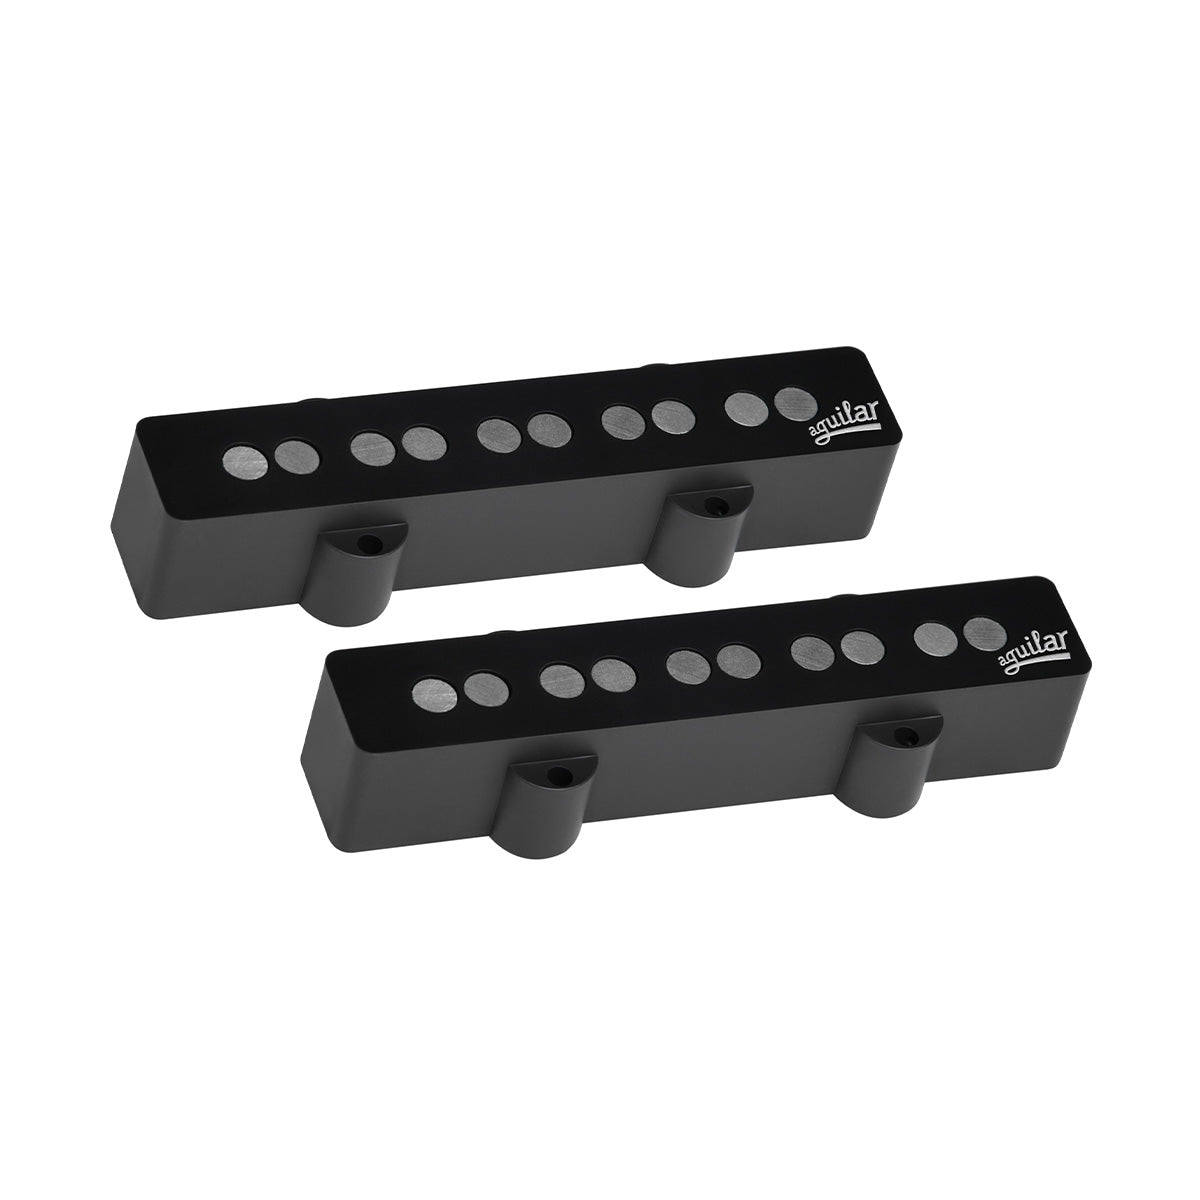 Aguilar AG 5J-HOT 5-string Overwound Jazz Bass Pickup Set  by Aguilar Shop